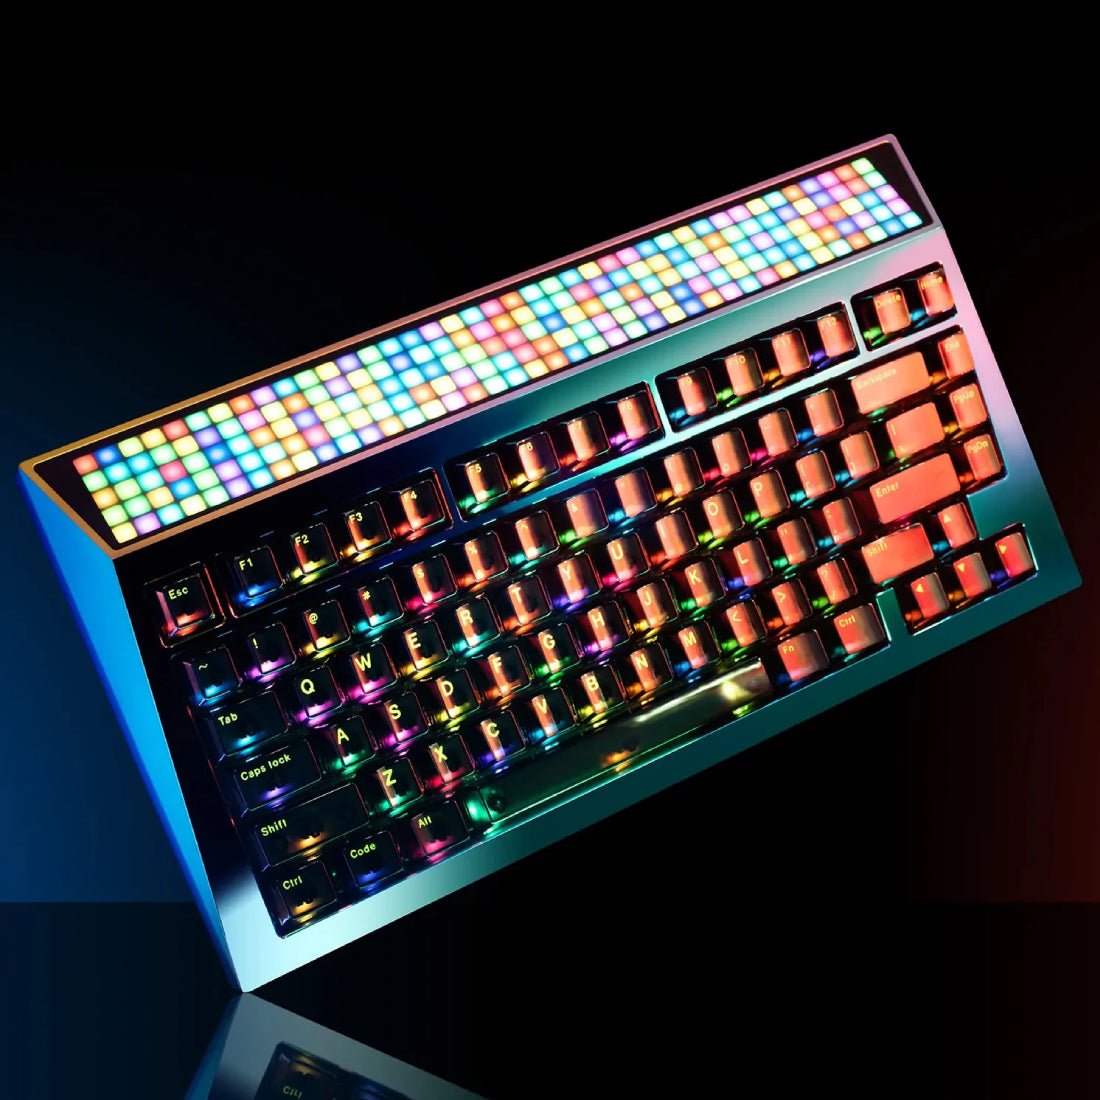 AngryMiao Cyberboard R2 Le Smoking Wireless Keyboard Limited Edition - Psychedelic - Store 974 | ستور ٩٧٤